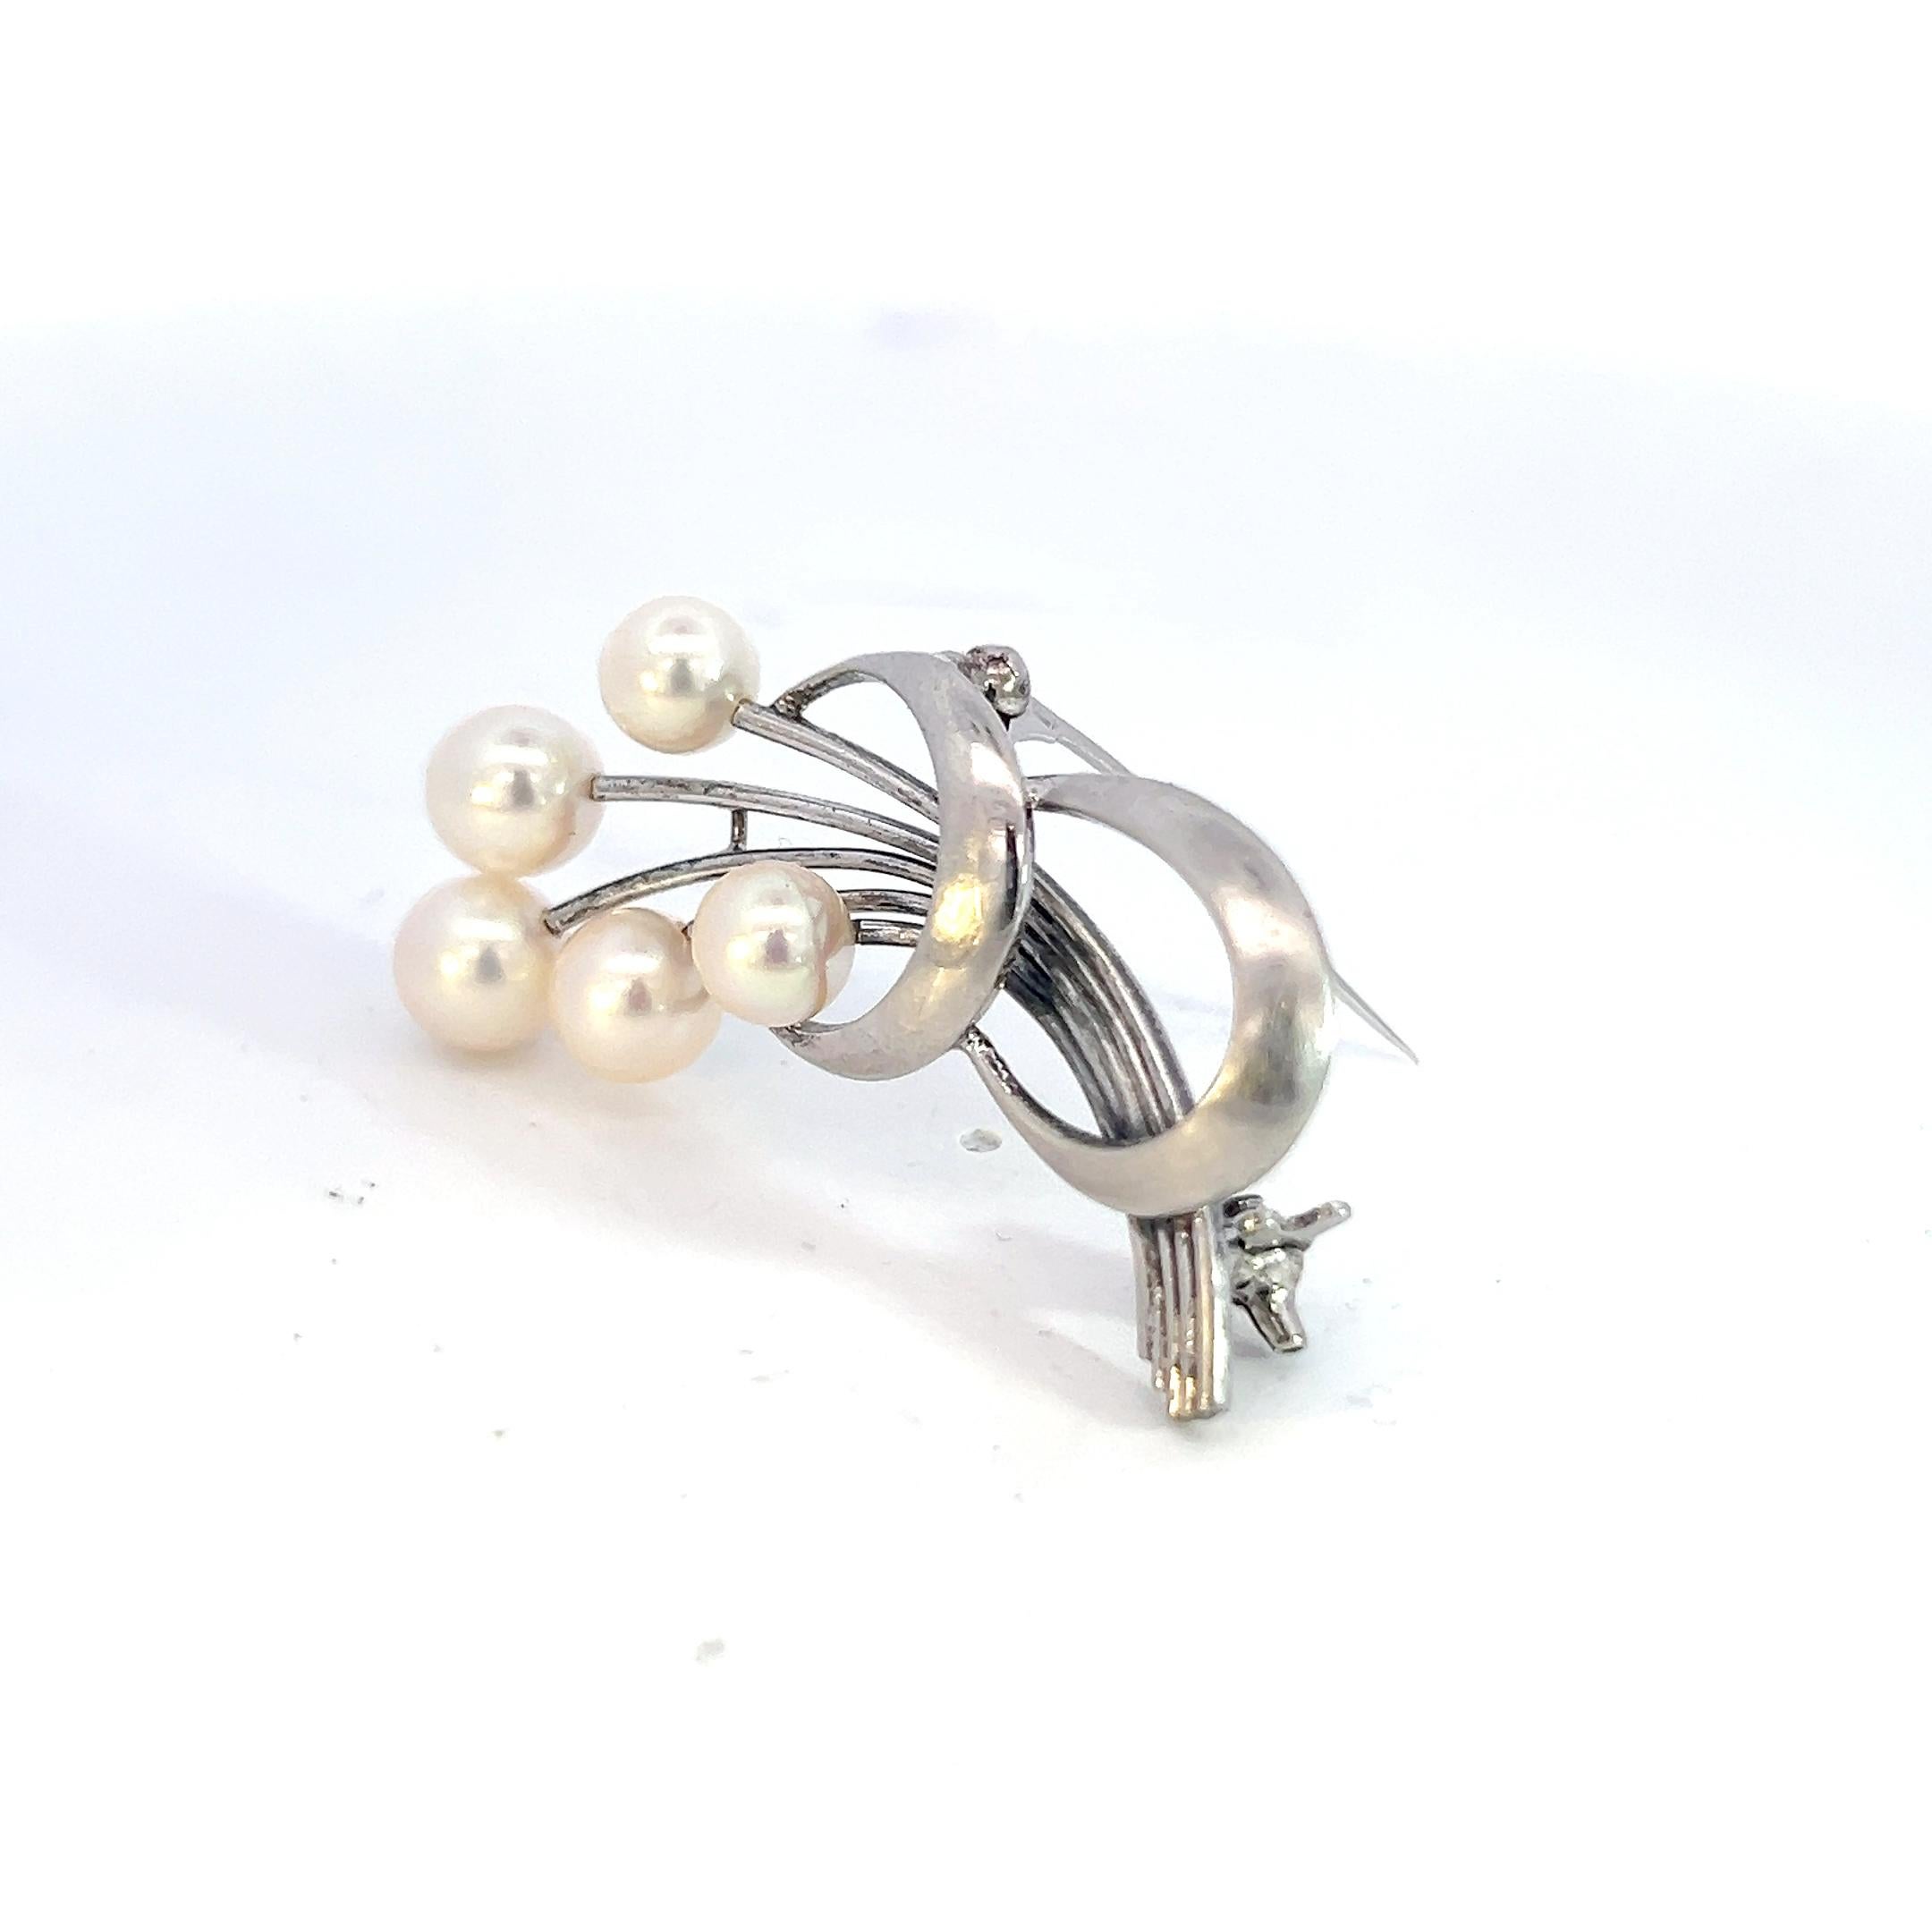 Mikimoto Estate Akoya Pearl Brooch 6.80 mm Silver M374

This elegant Authentic Mikimoto Silver brooch has 5 Saltwater Akoya Cultured Pearls size is 6.80 mm and has a weight of 5.4 grams.

TRUSTED SELLER SINCE 2002

PLEASE SEE OUR HUNDREDS OF